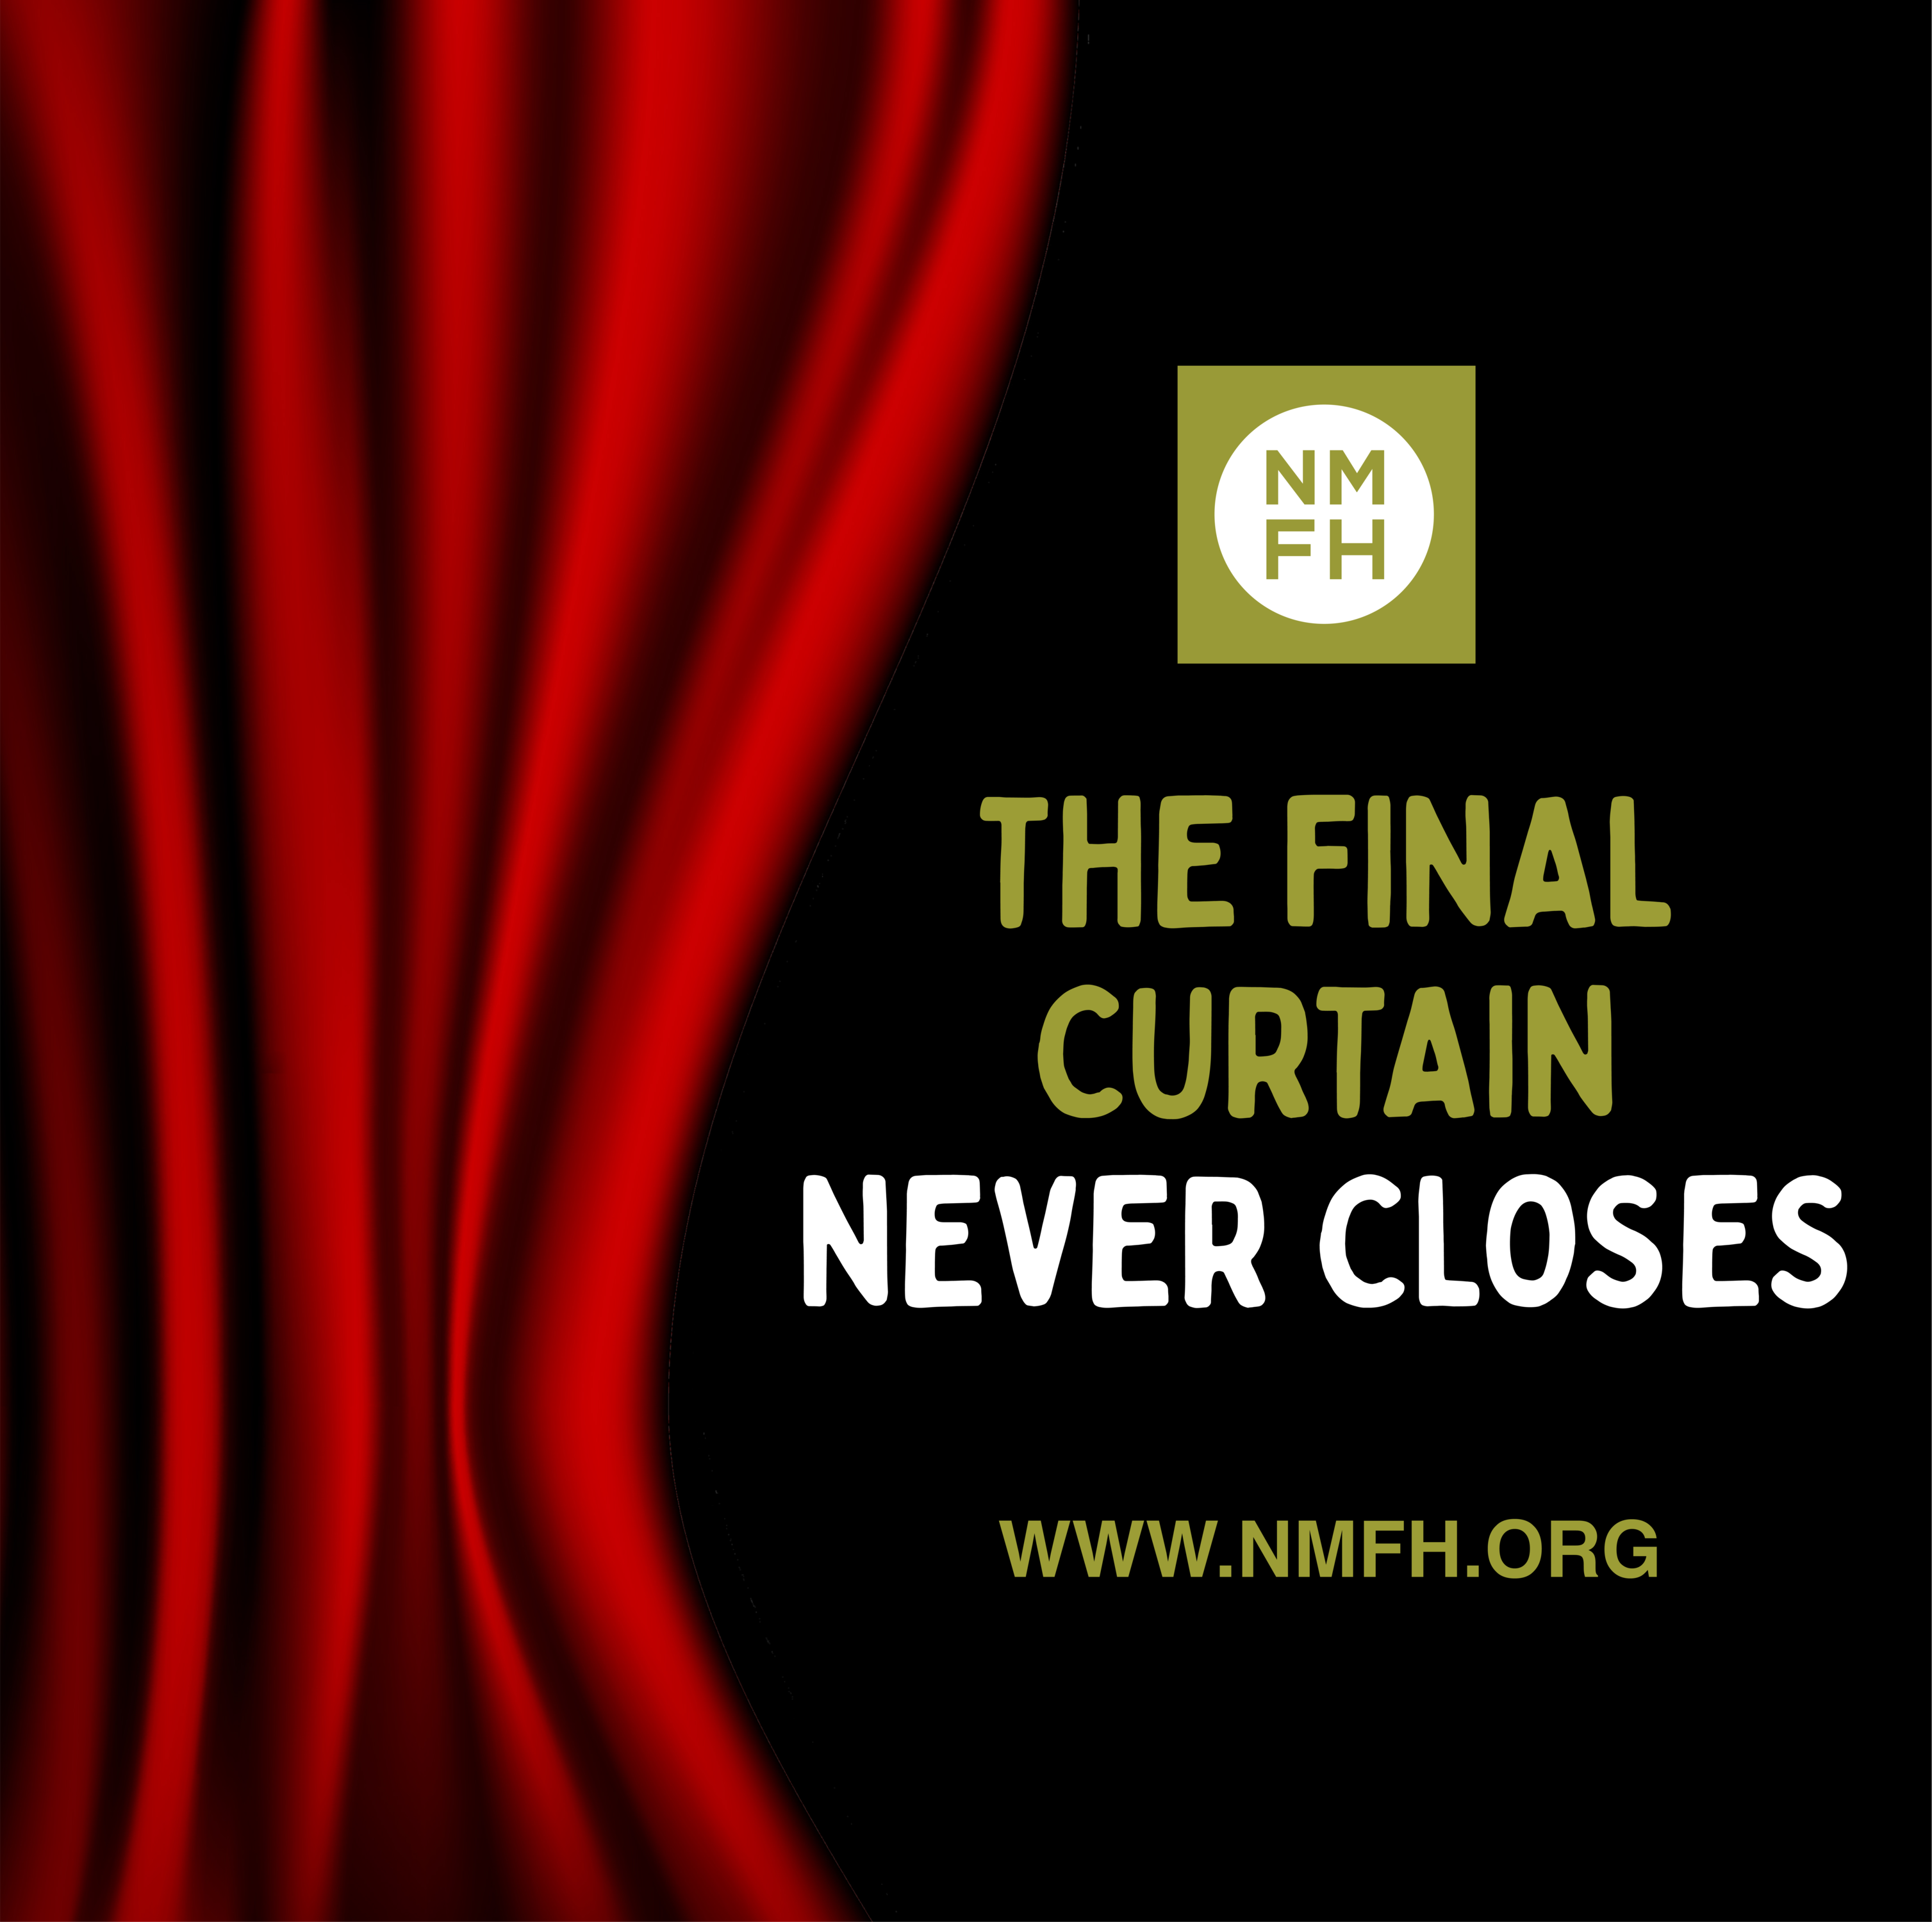 The Final Curtain Never Closes